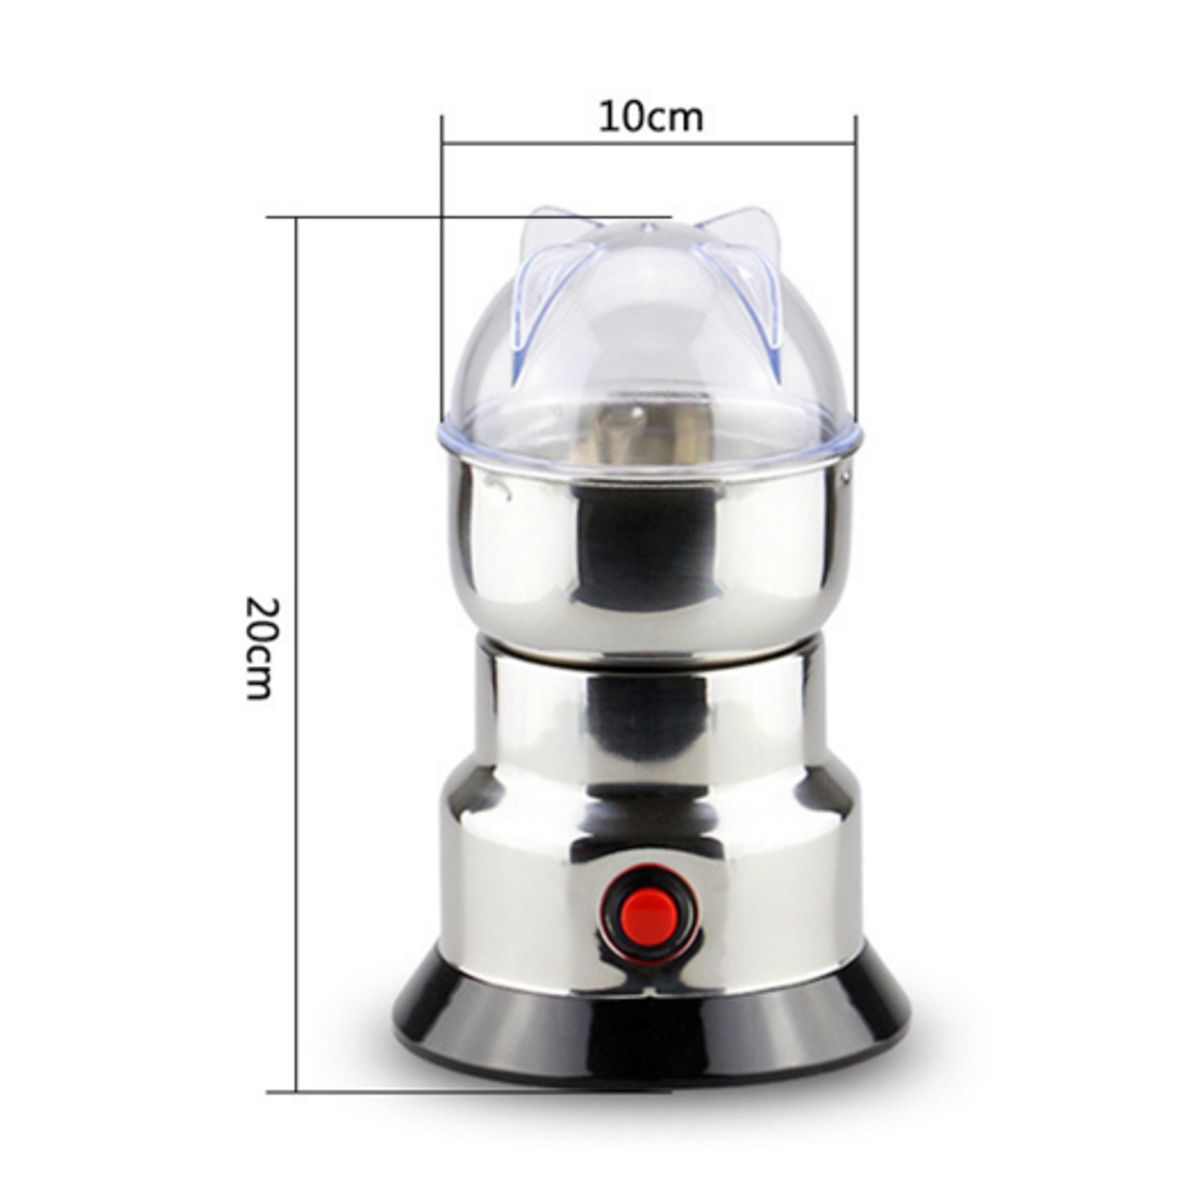 220V-100W-Electric-Herb-Beans-Grain-Coffee-Grinder-Cereal-Mill-Grinding-Machine-1363112-10